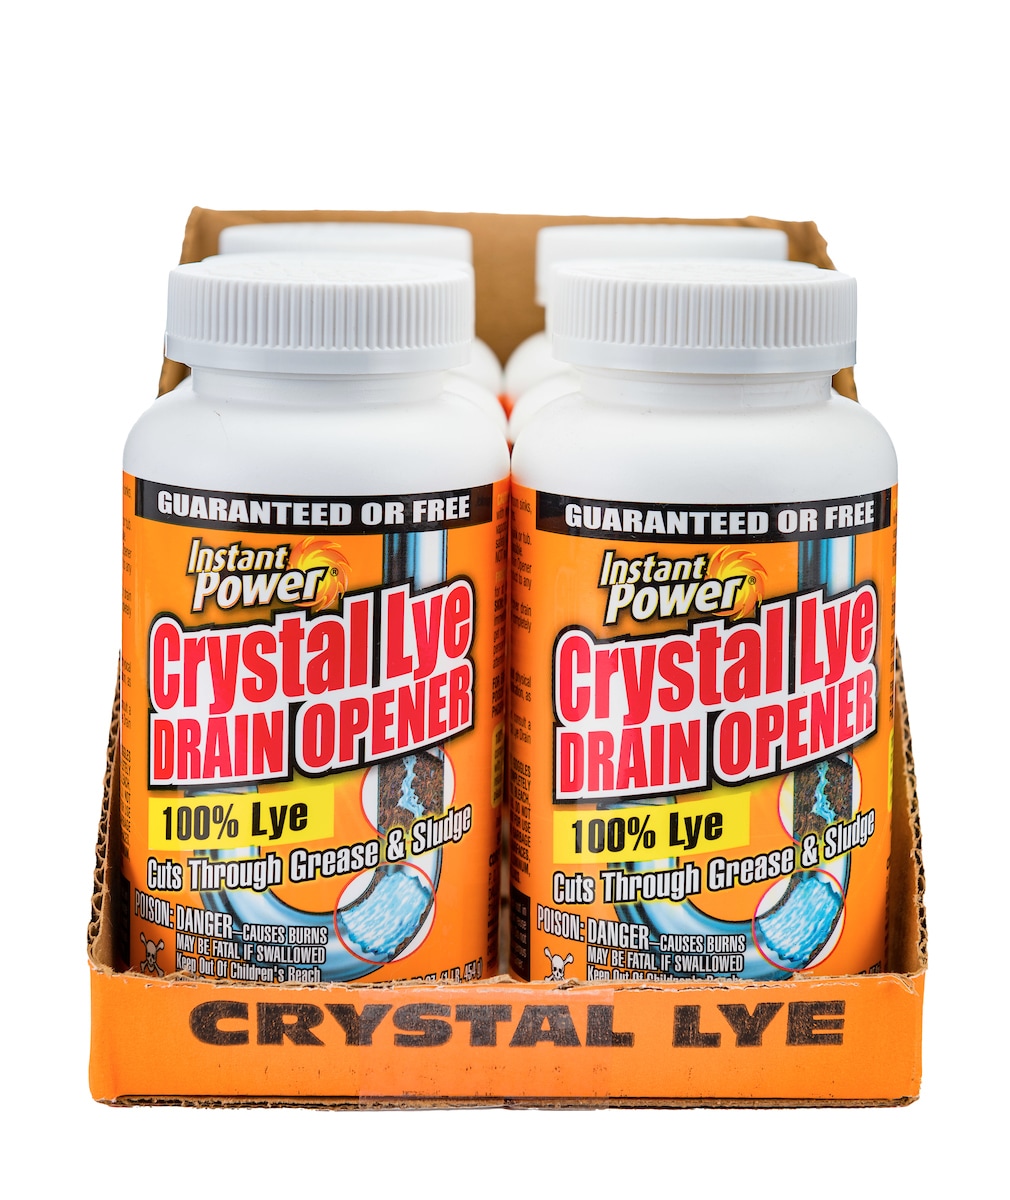 Crystal Lye Drain Cleaner - Powerful Solution for Clogged Drains